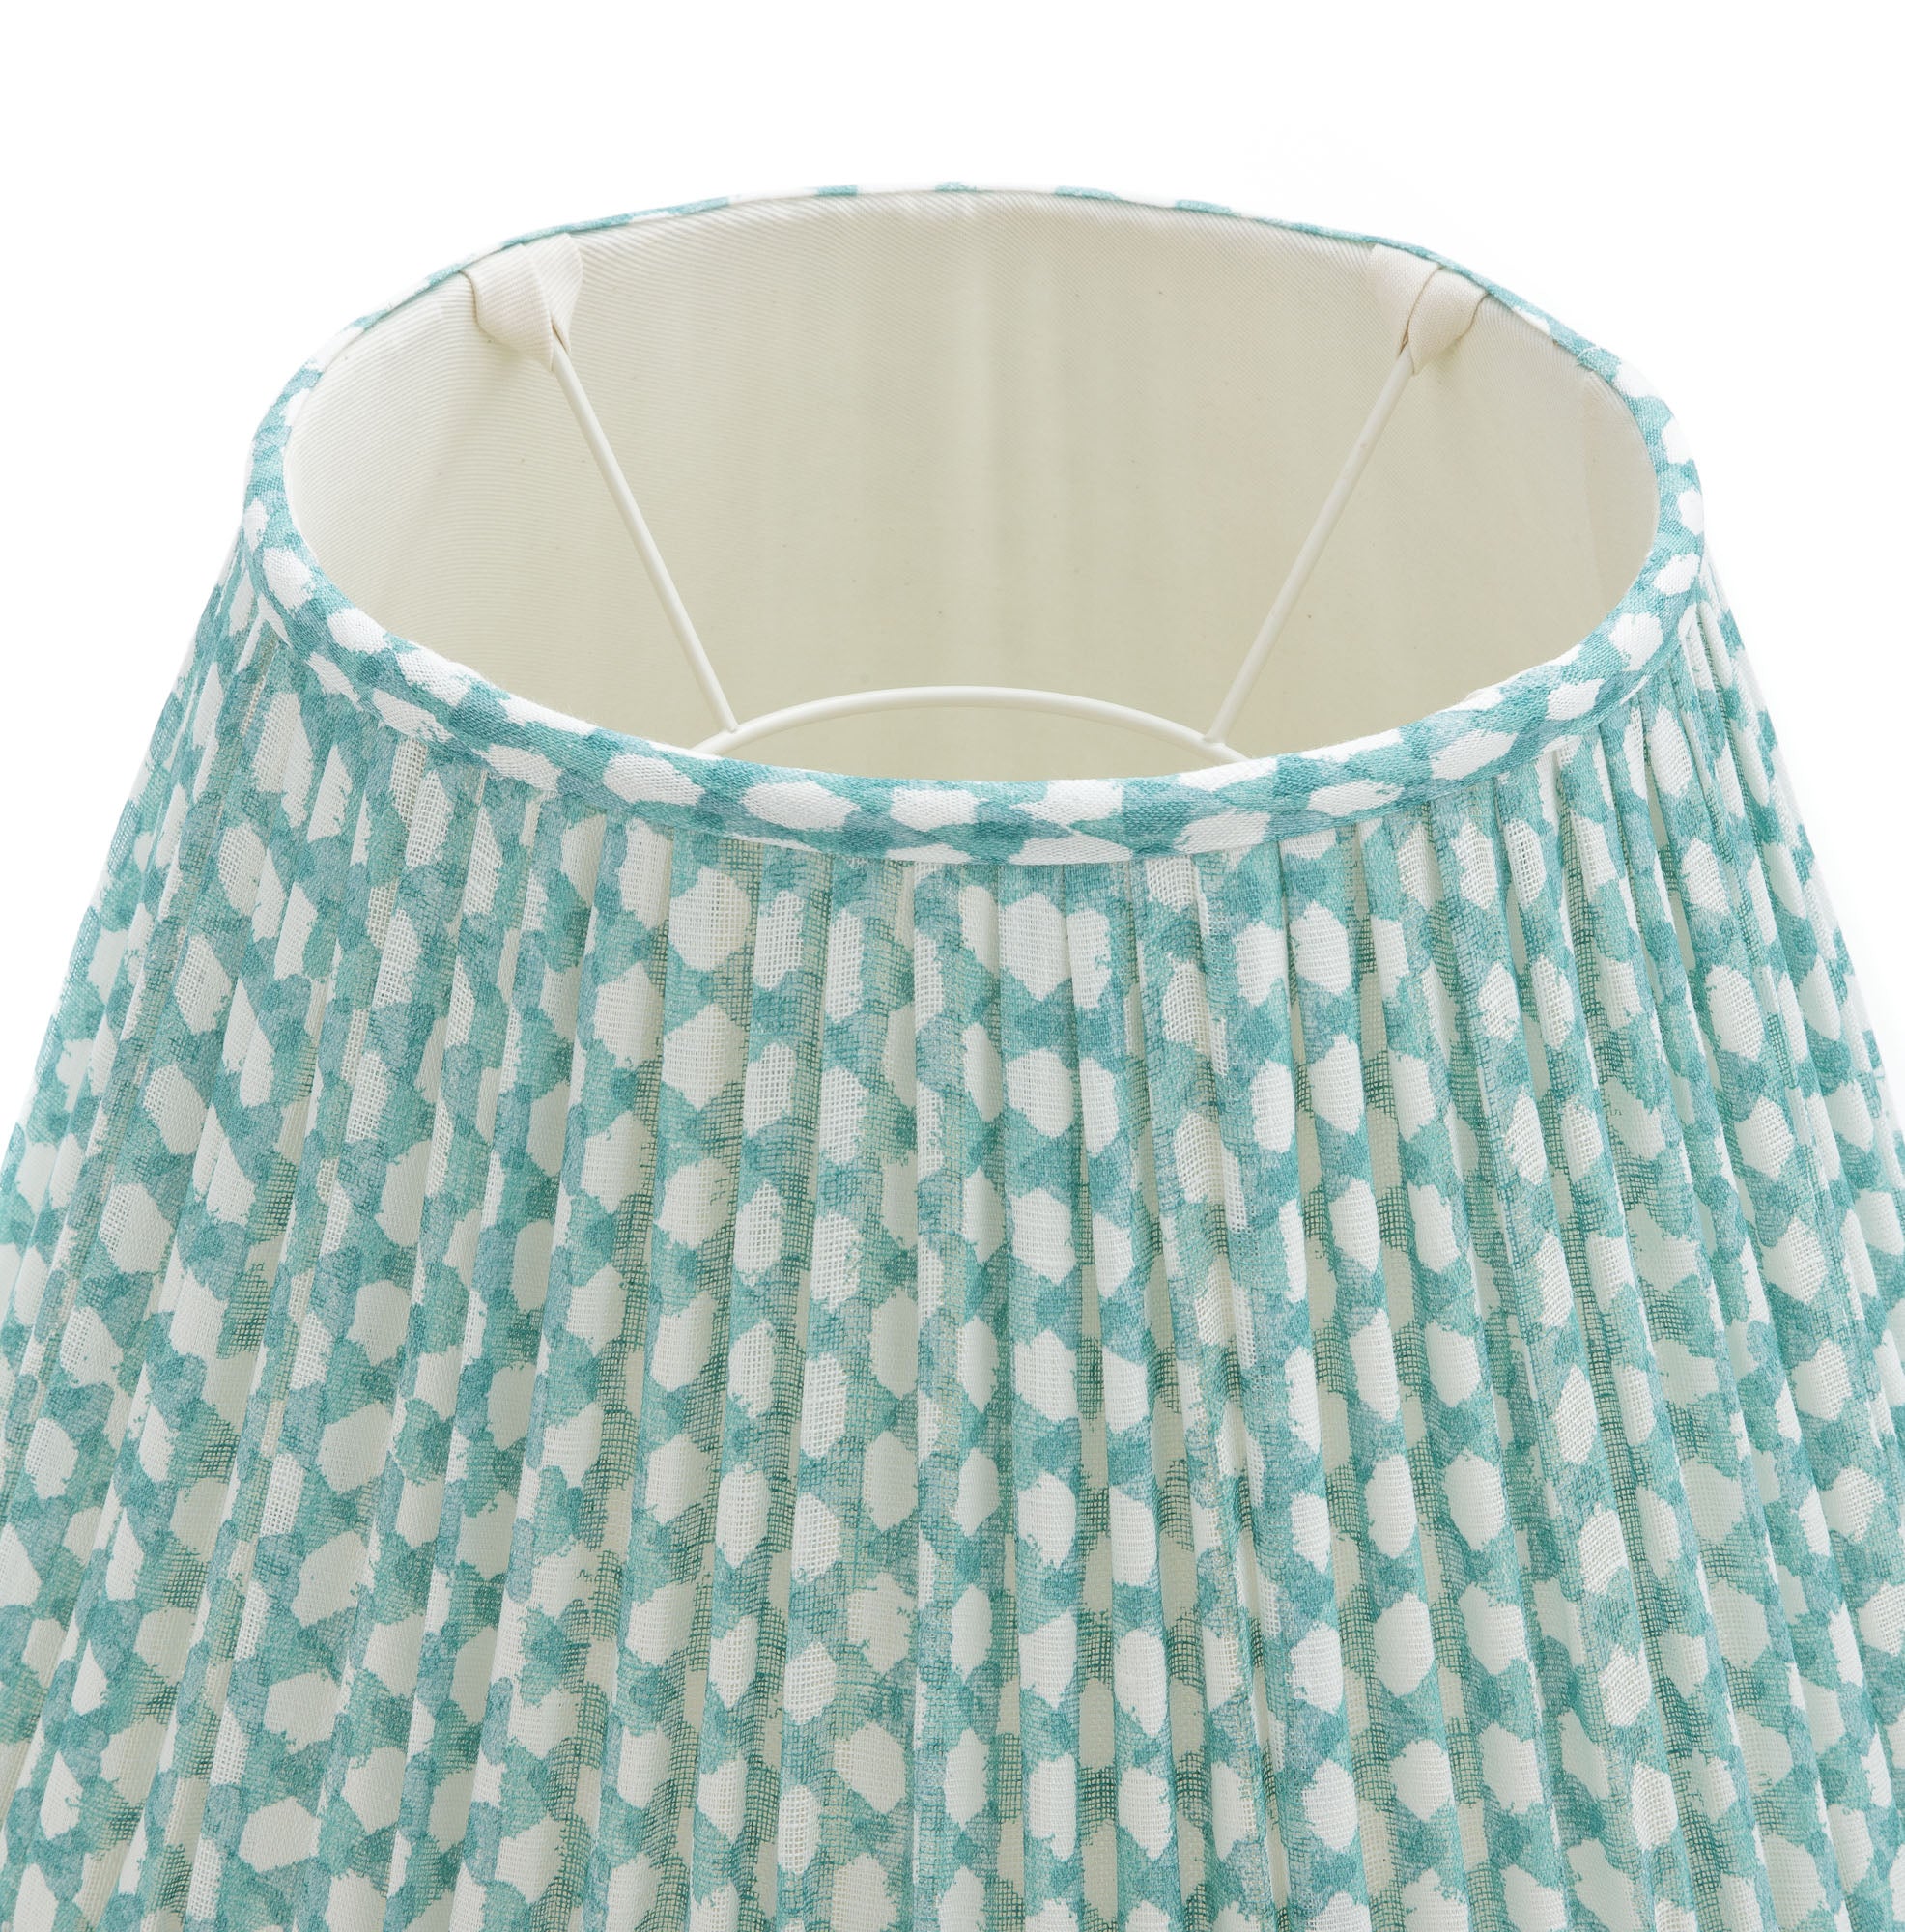 Wicker Turquoise Linen Lampshade